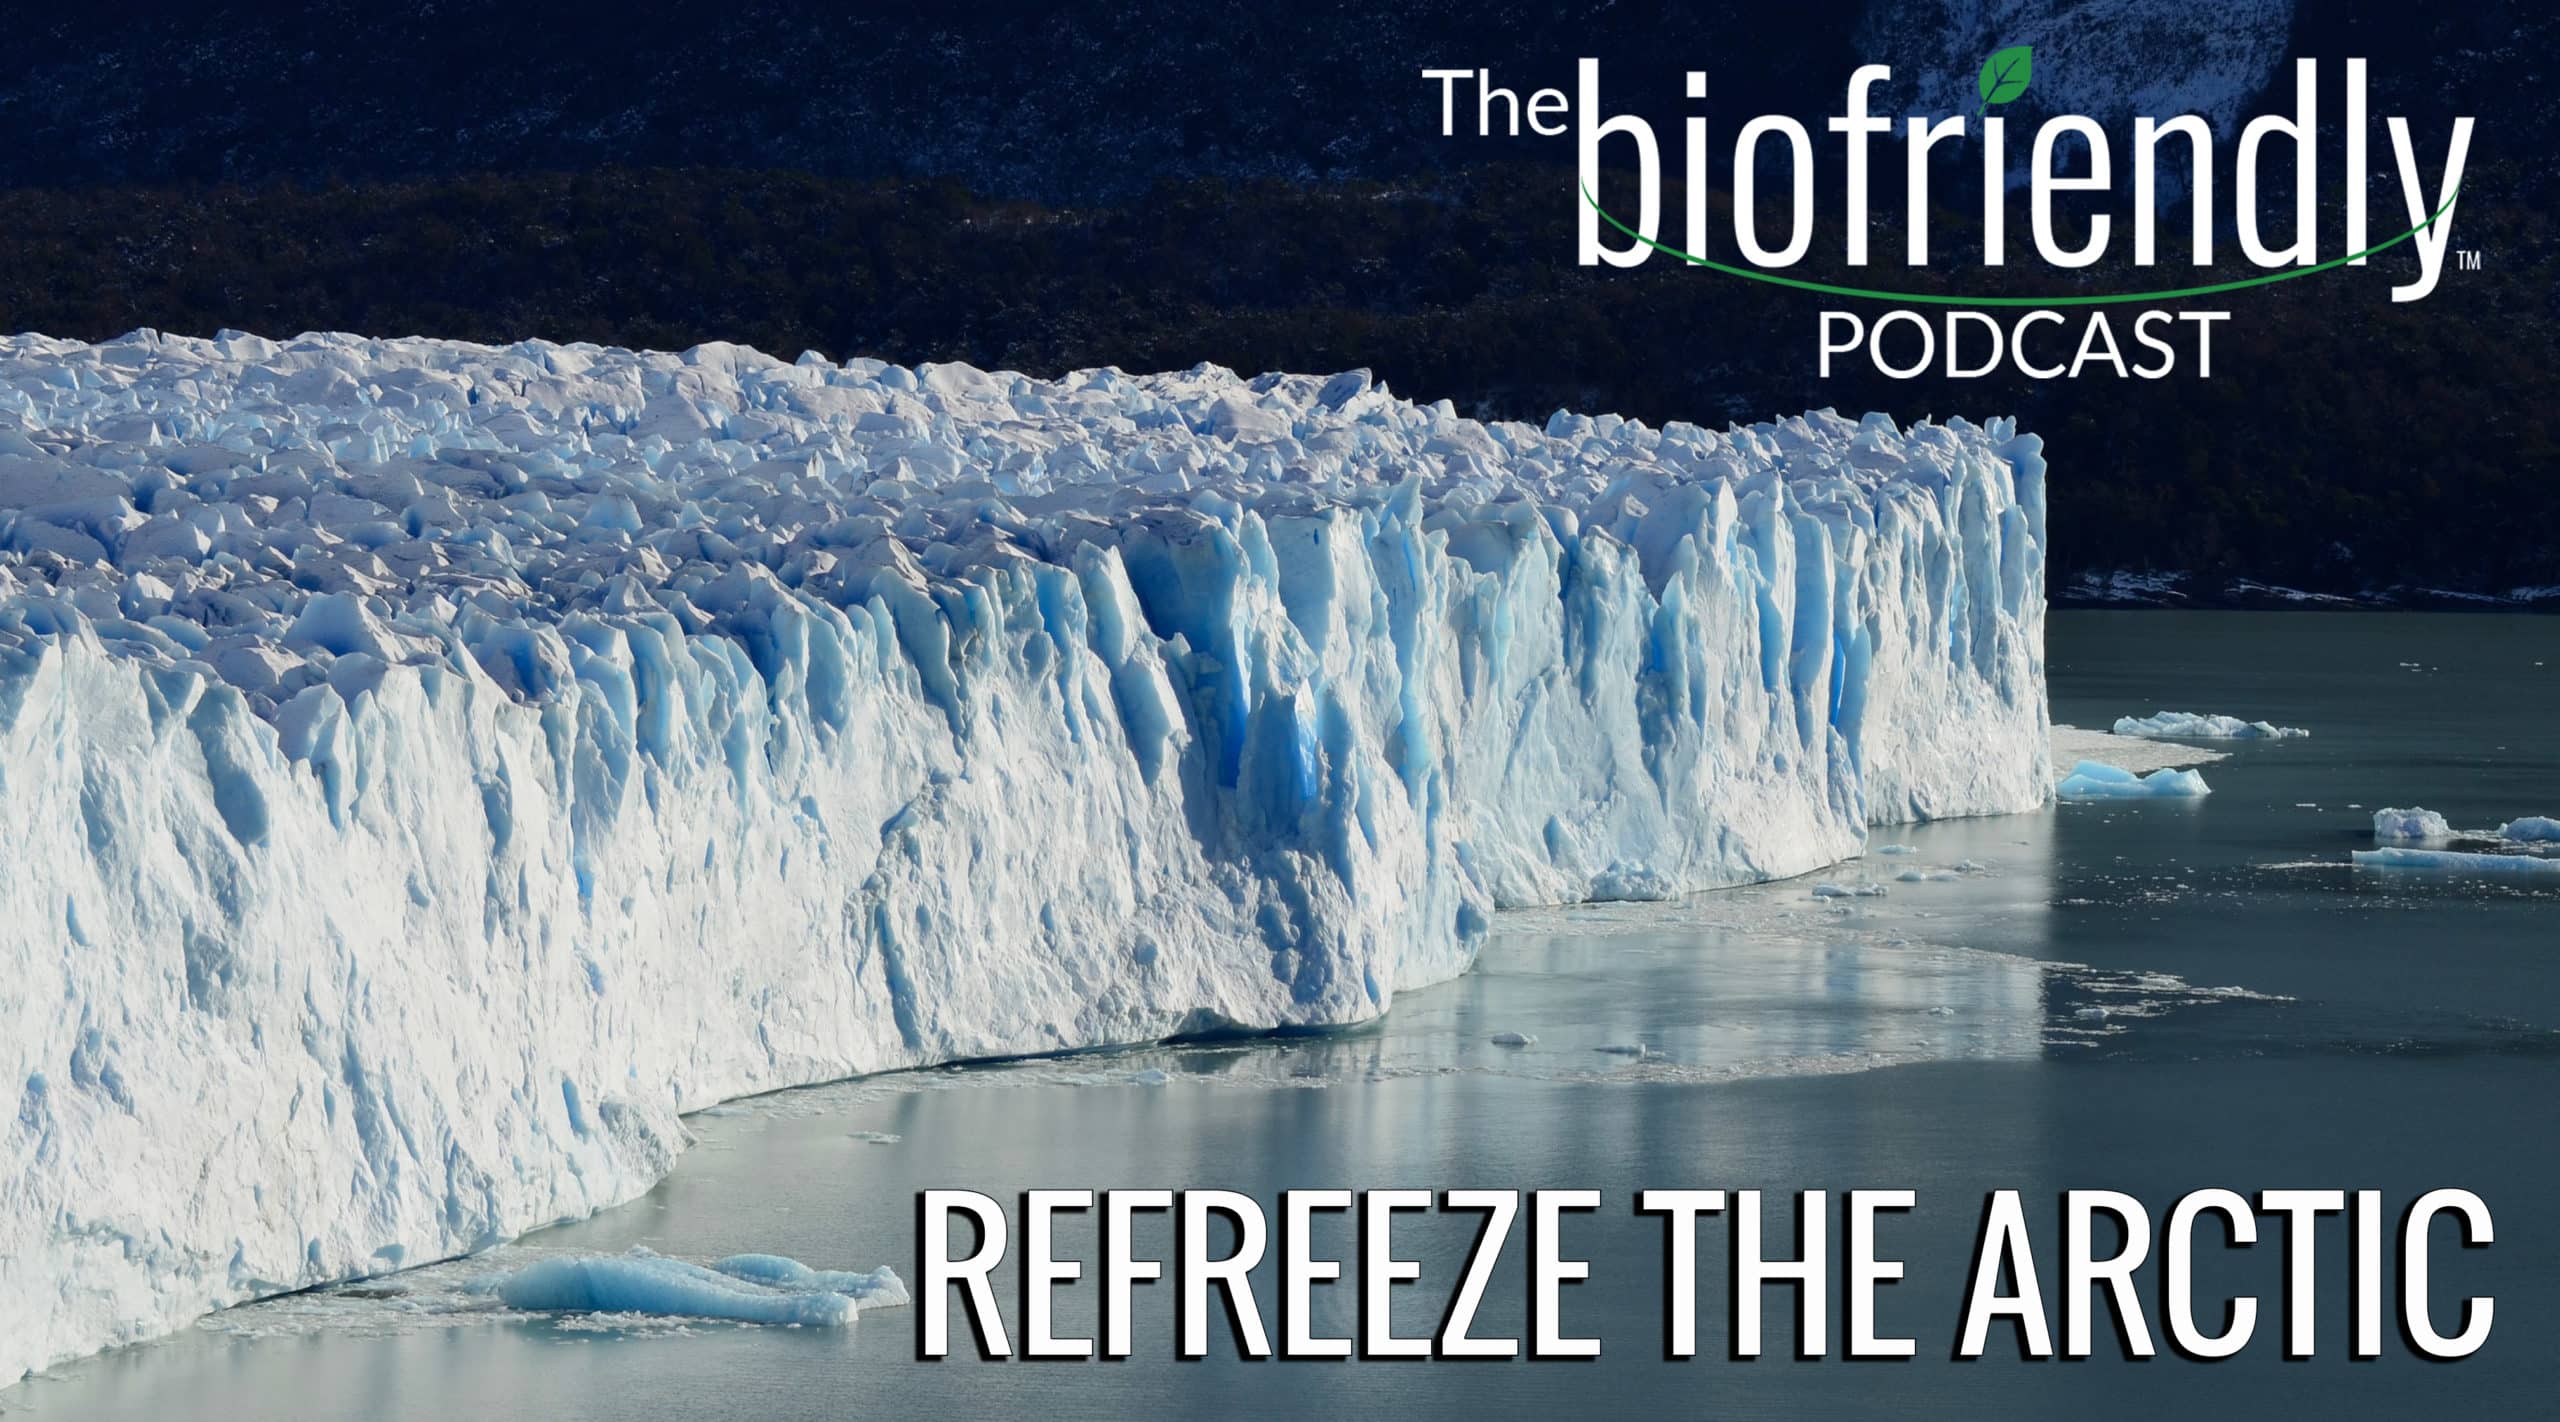 The Biofriendly Podcast - Episode 39 - Refreeze The Arctic